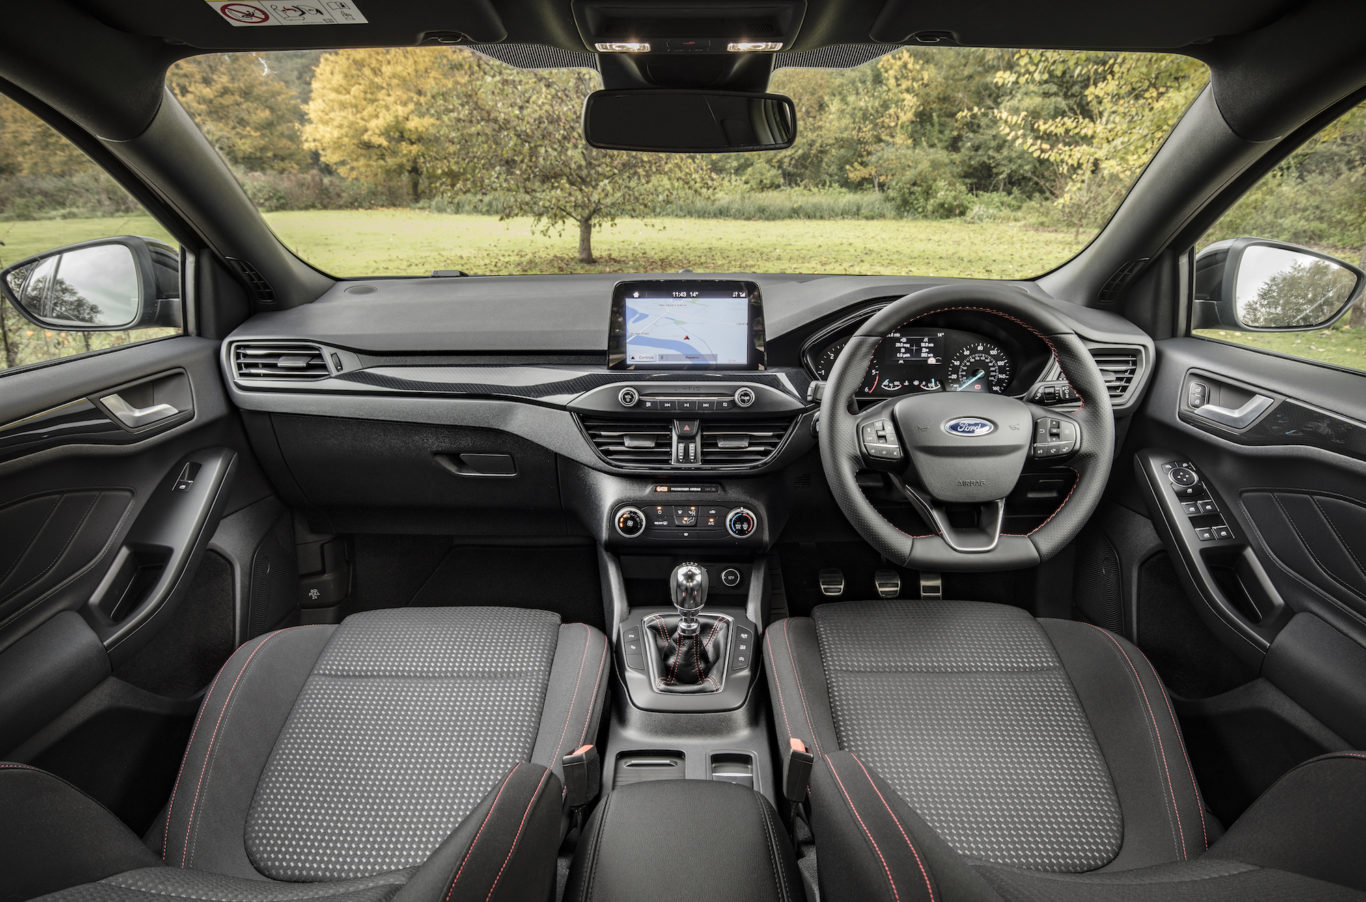 The interior of the Focus is well made